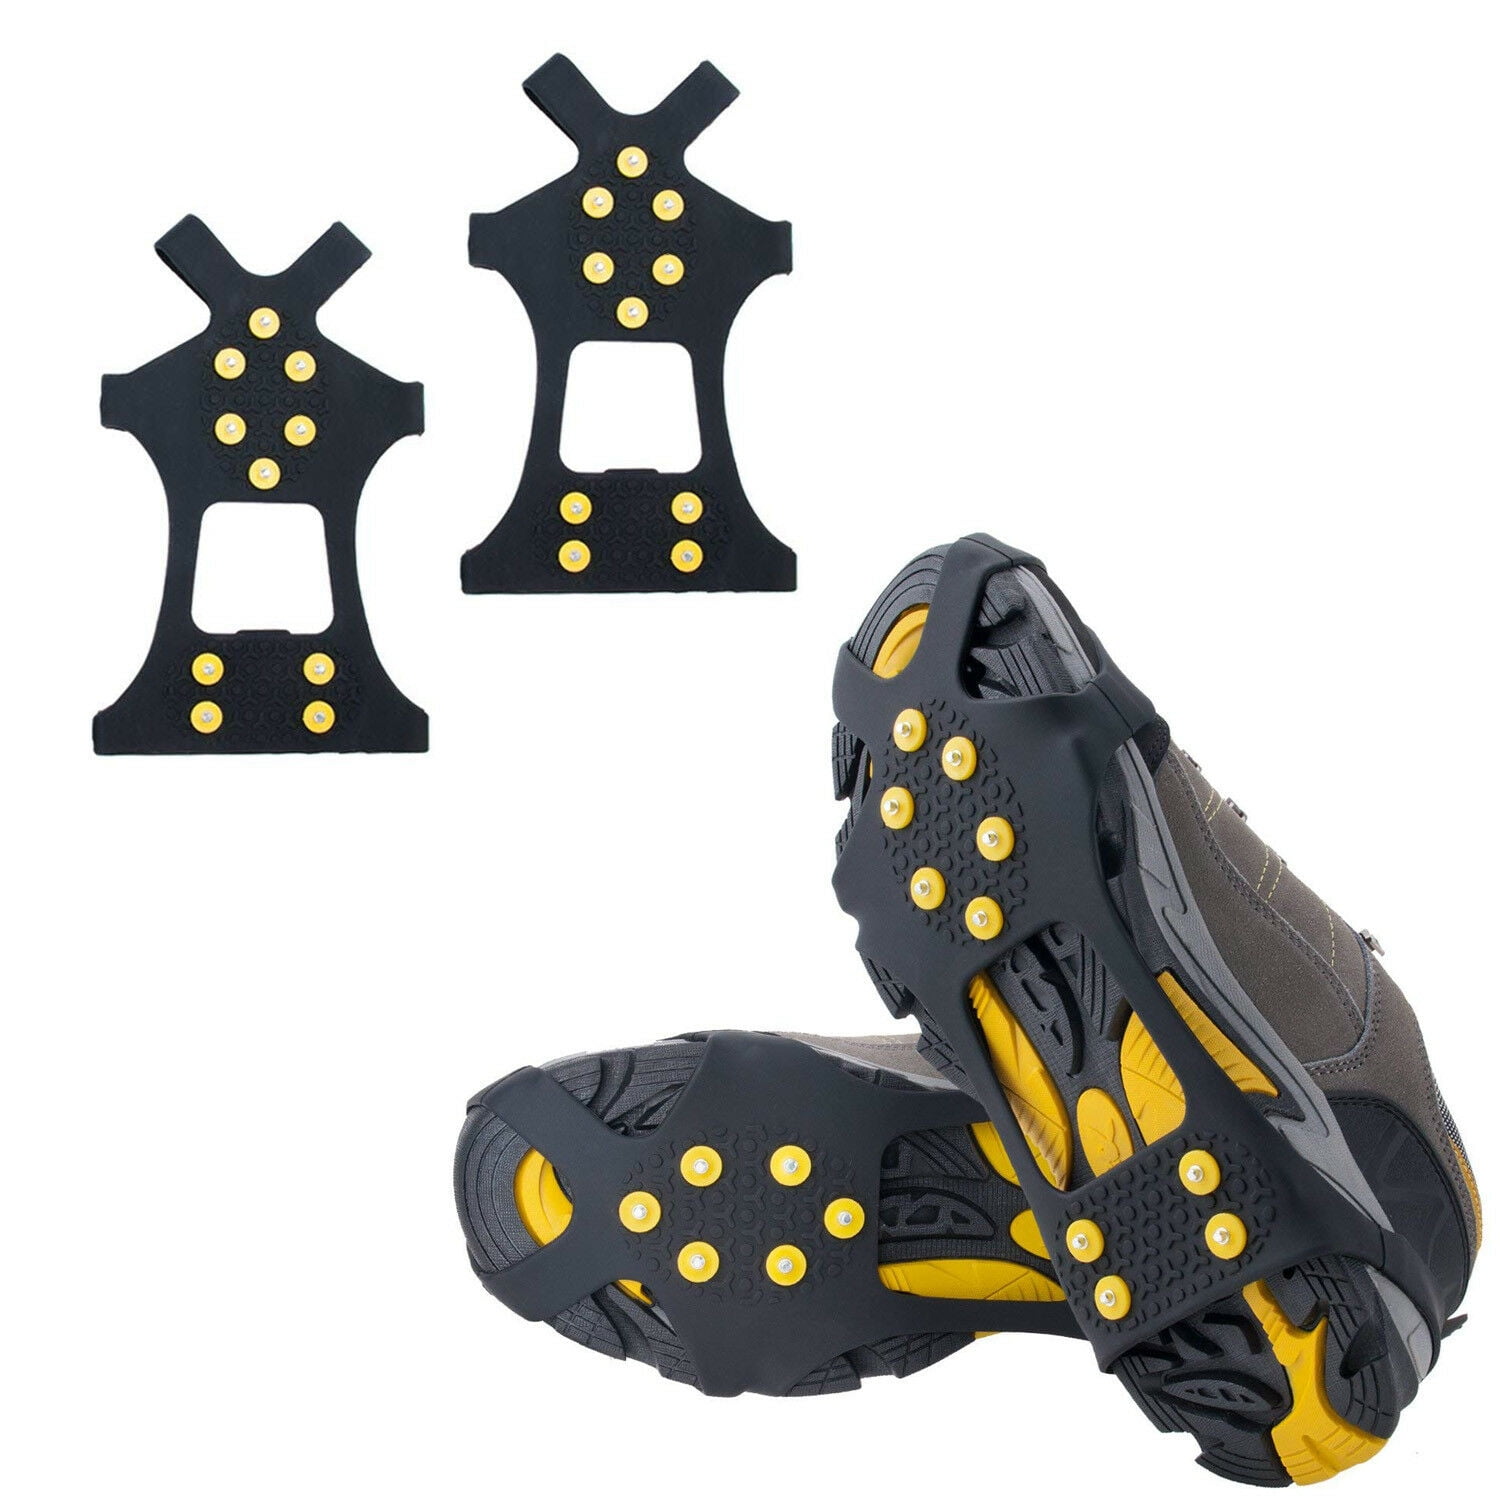 S/M/L/XL 10-Stud Ice & Snow Grips Over Shoe/Boot Cleat Anti Slip Crampons US 